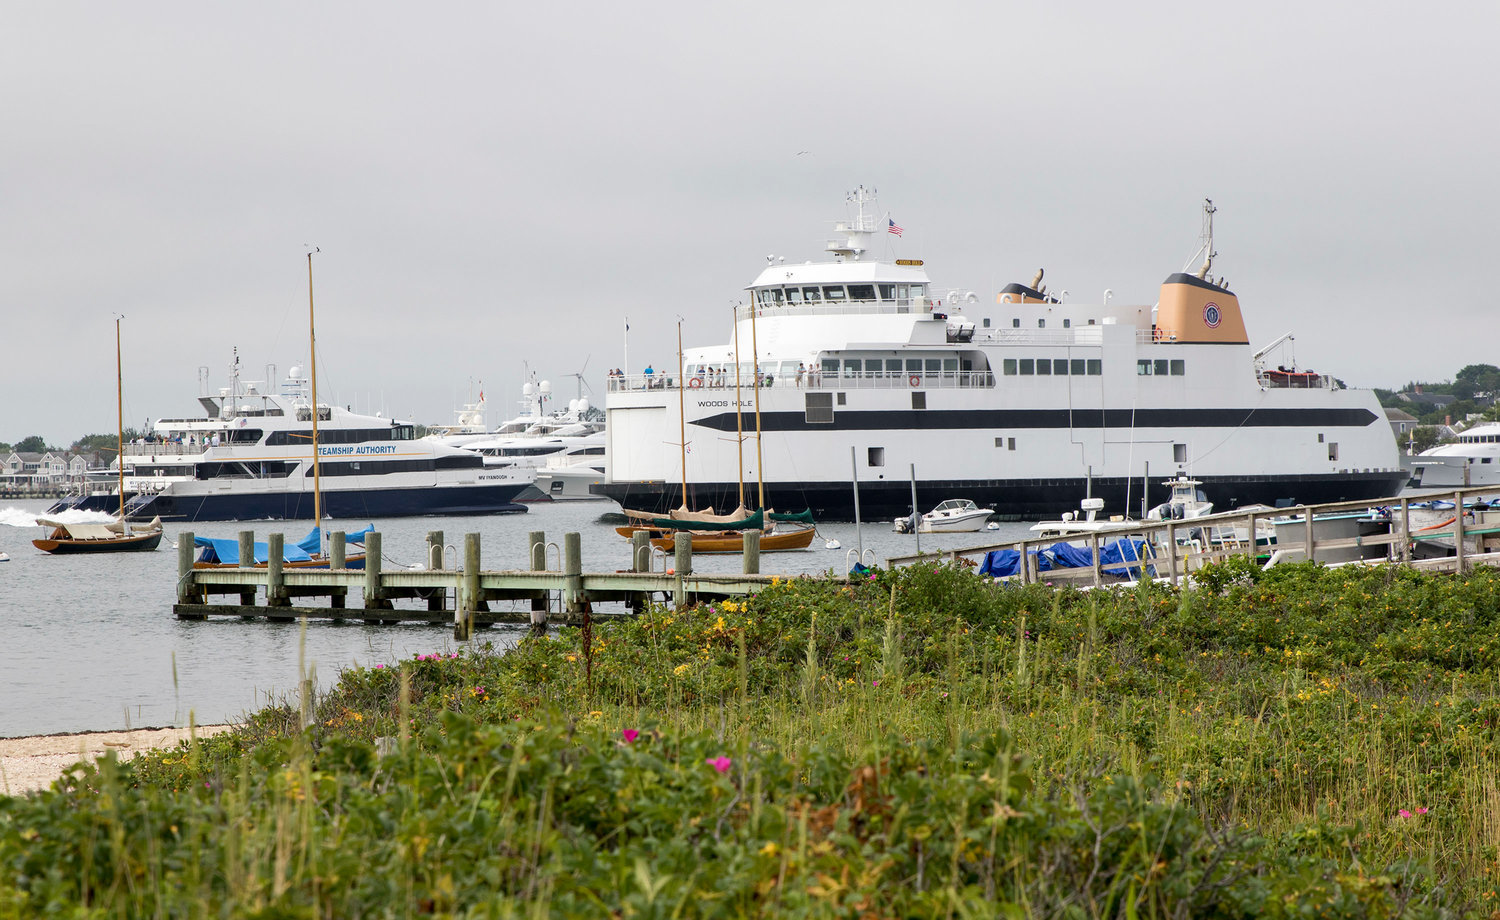 The Steamship Authority car ferry Woods Hole leaves its berth while the fast ferry Iyanough arrives in Nantucket Harbor.